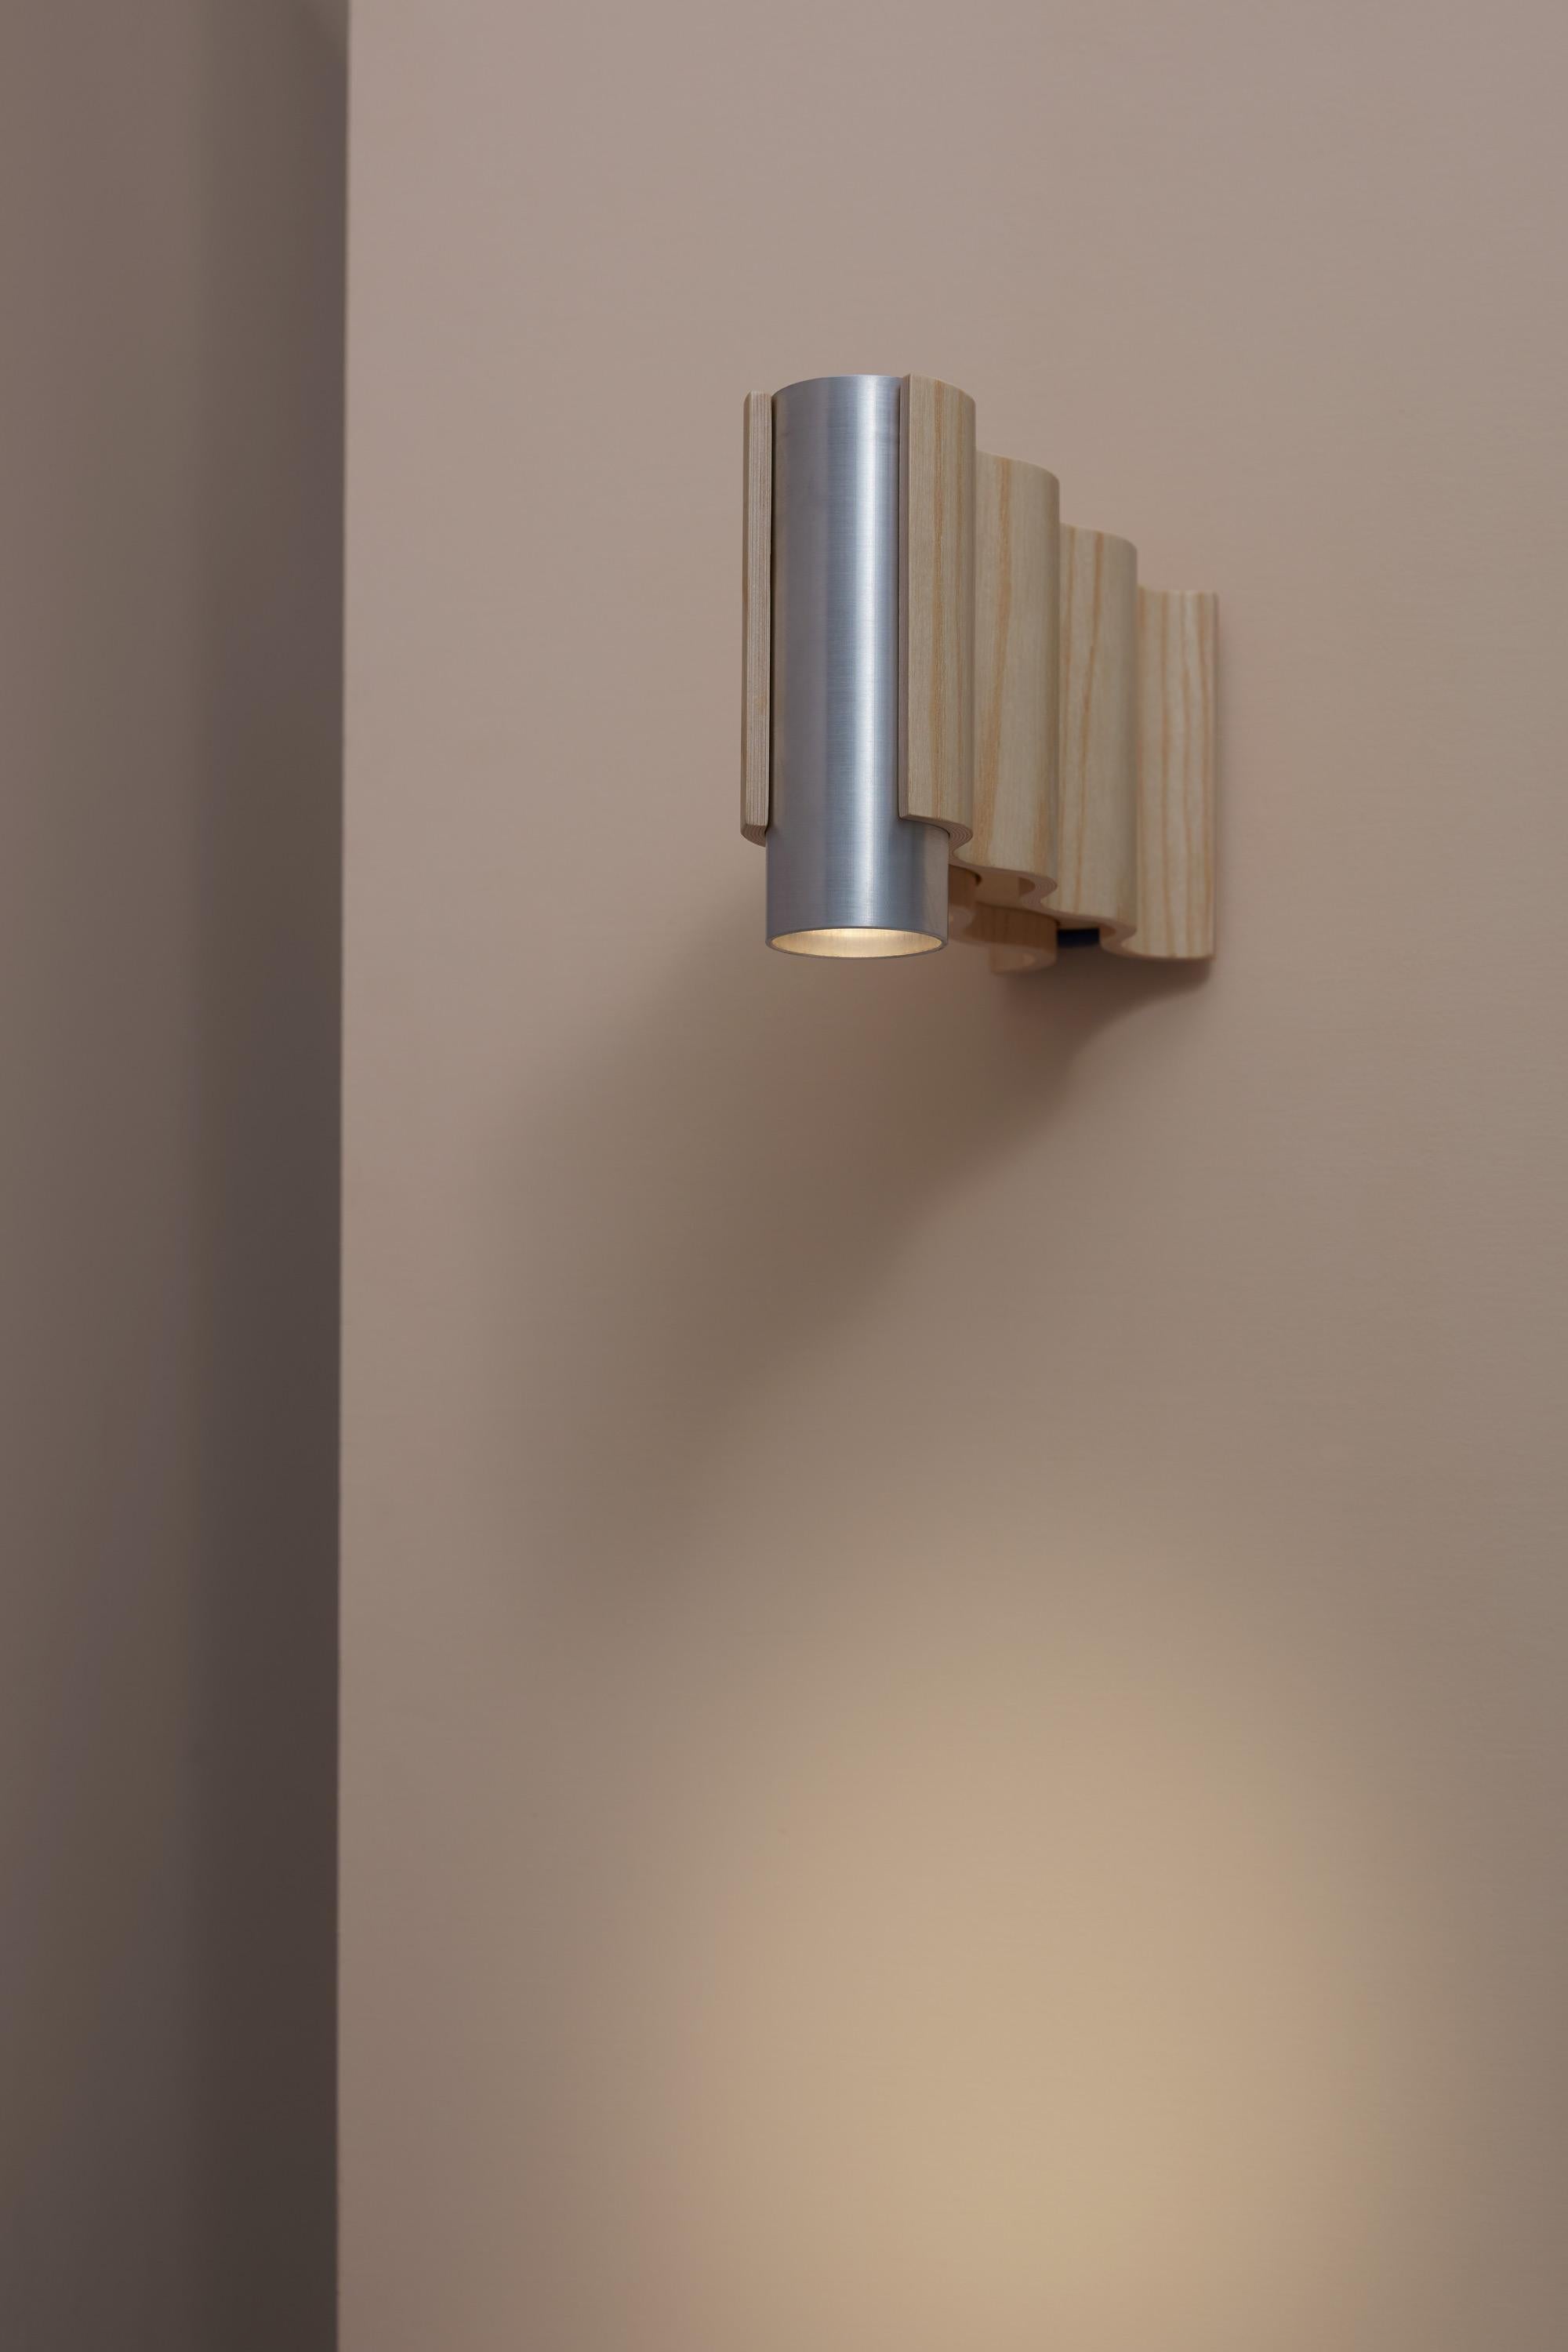 Single sconce spot light made from natural ash veneered plywood (clear coated) and brushed aluminium tube.

Technical information:
- Comes with dimmable spot light (3.6W, 300 Lumen, 3000° Kelvin, 36 degree beam angle)
- Wired for a 230/220V or 110V